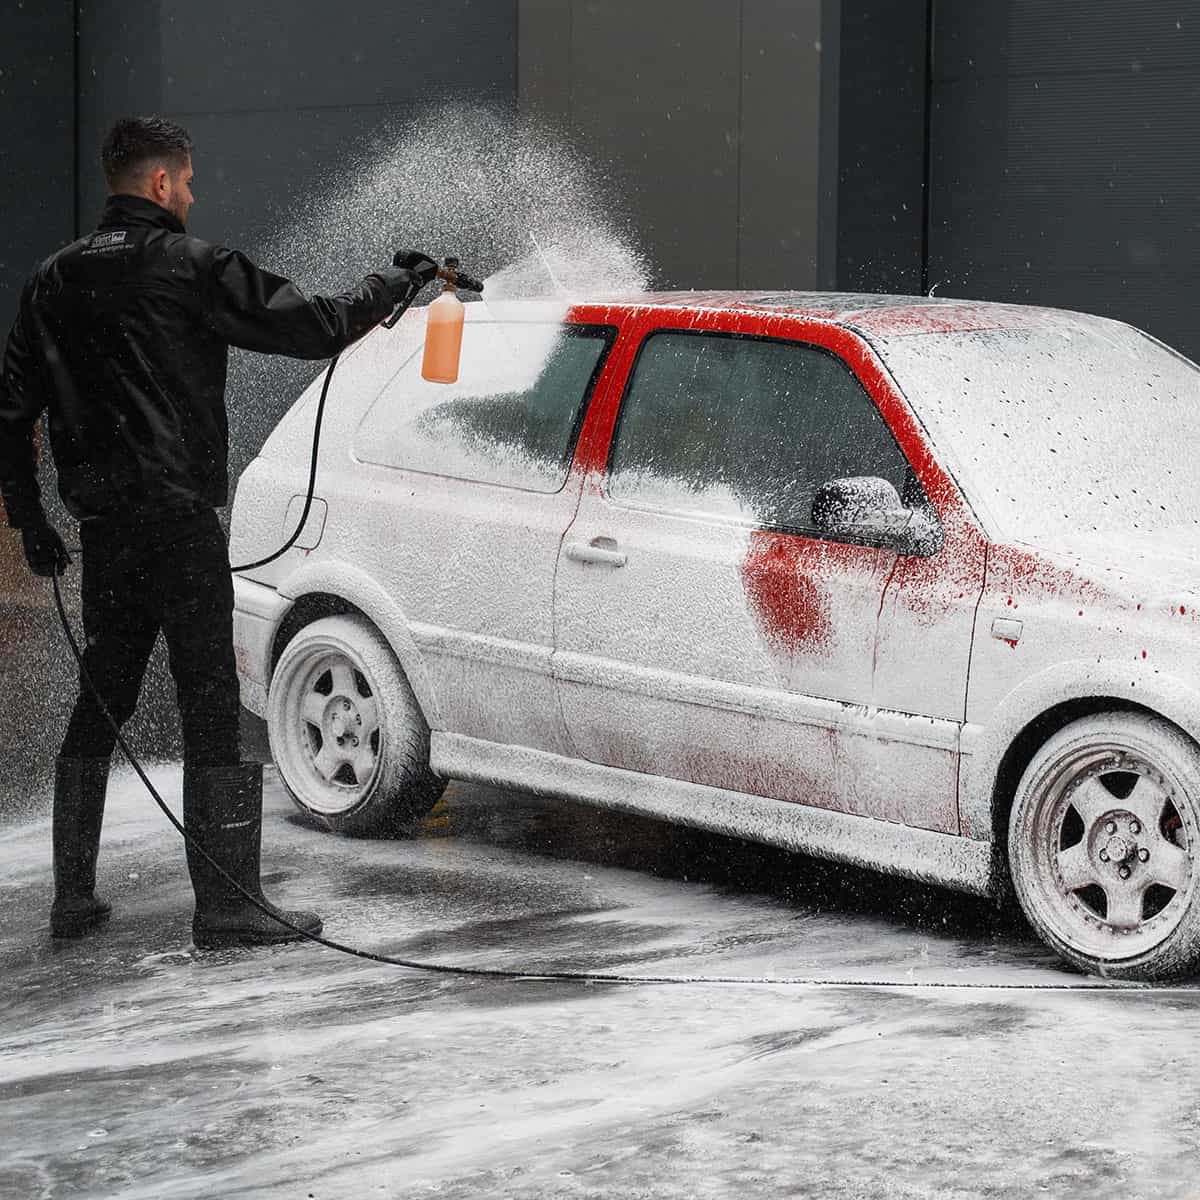 ValetPRO pH Neutral Snow Foam: "That PH neutral Snow Foam is the best I've used within the past 3 years! I really like your products!" - Constant Detailing, via Messenger